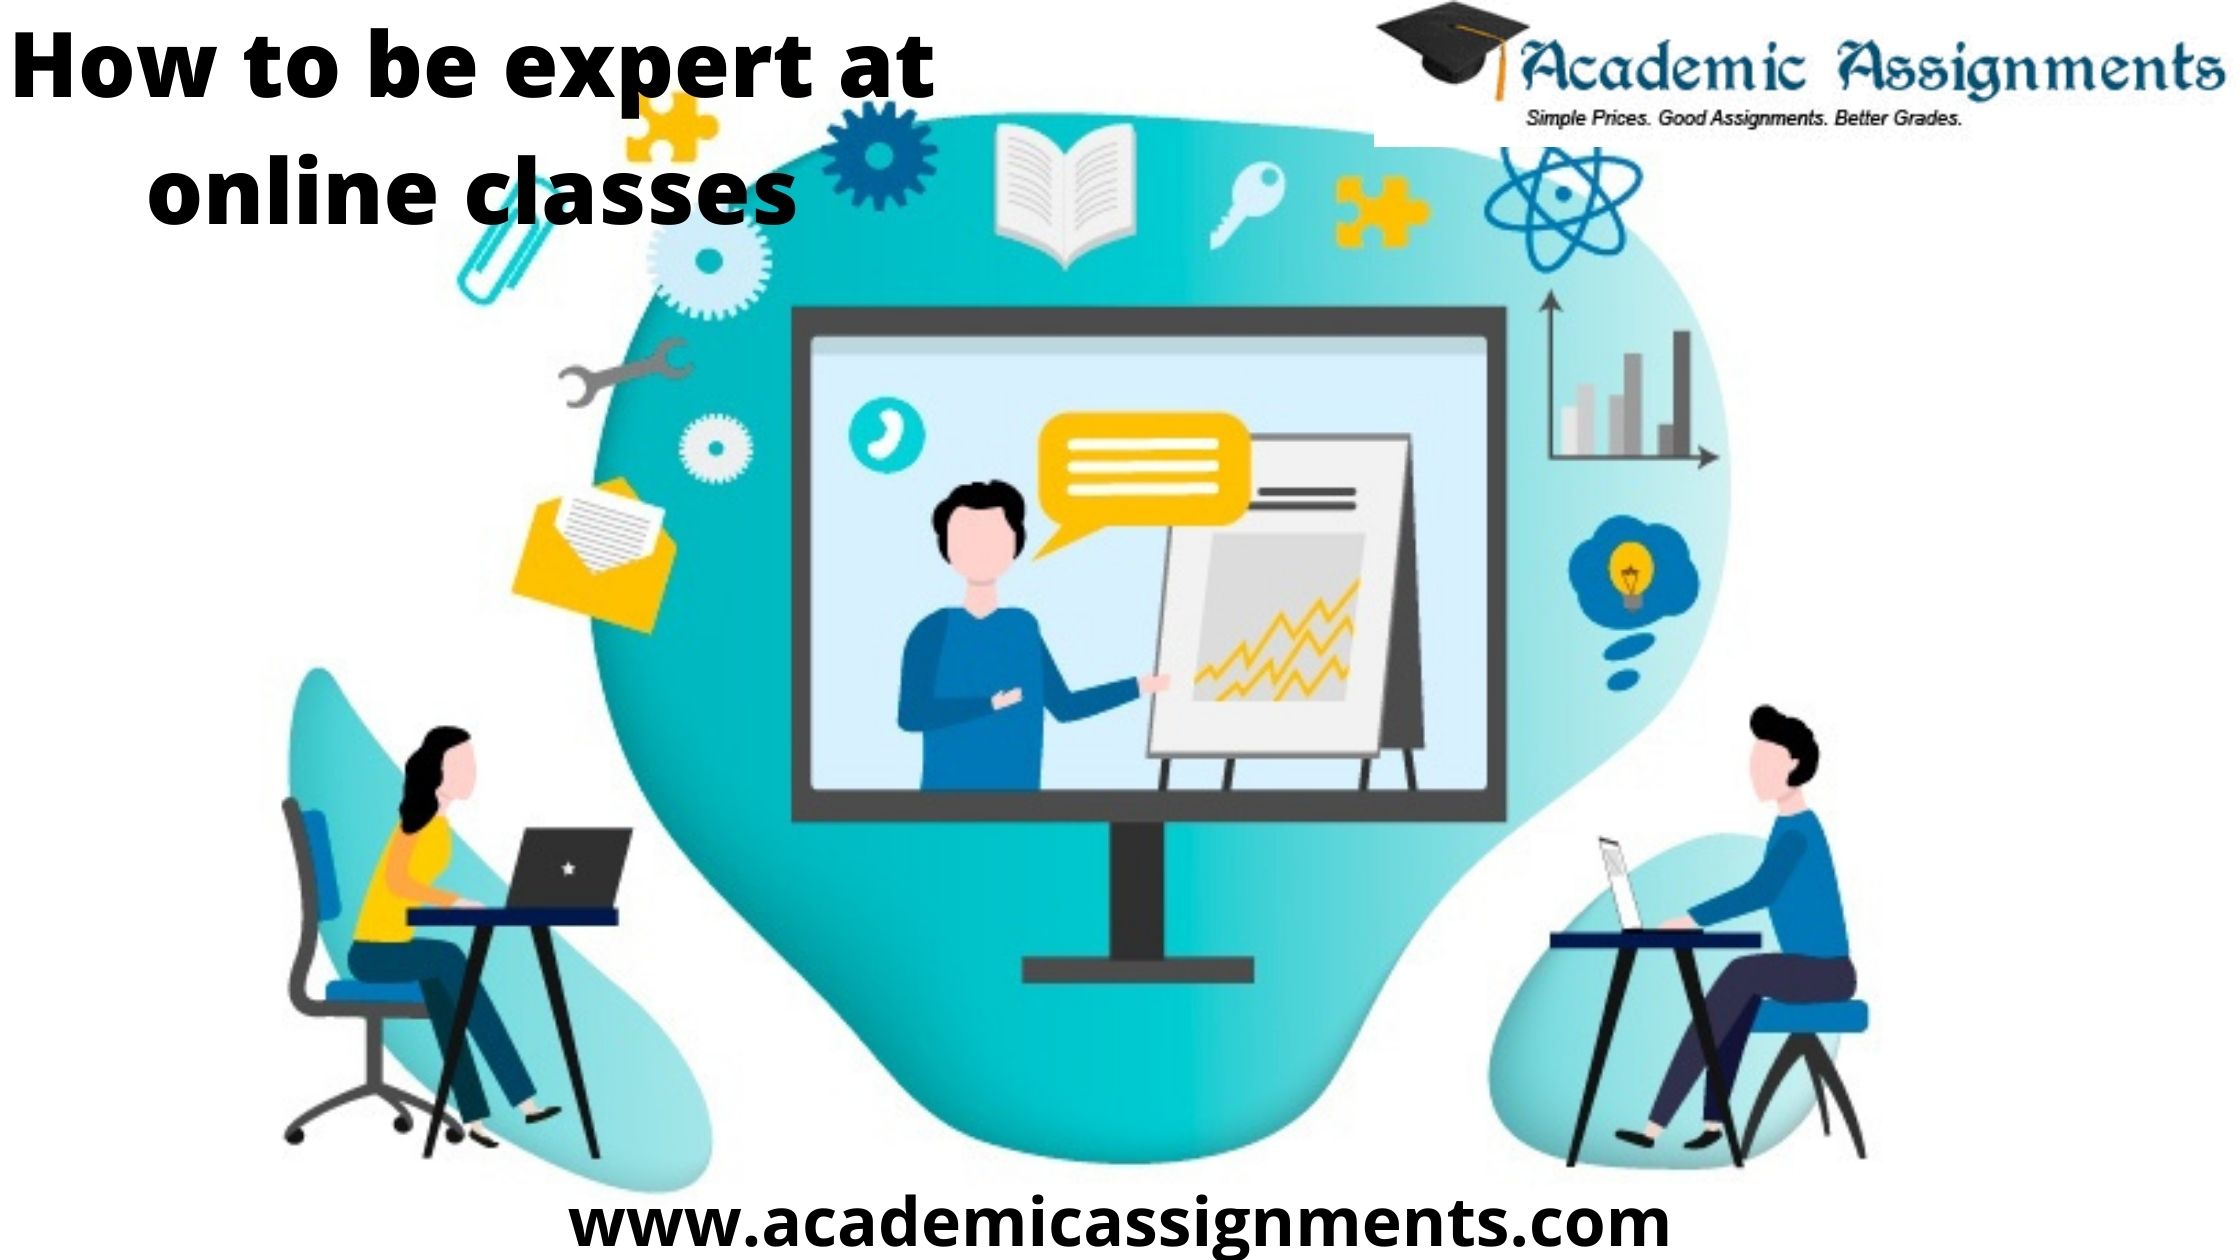 How to expert online classes